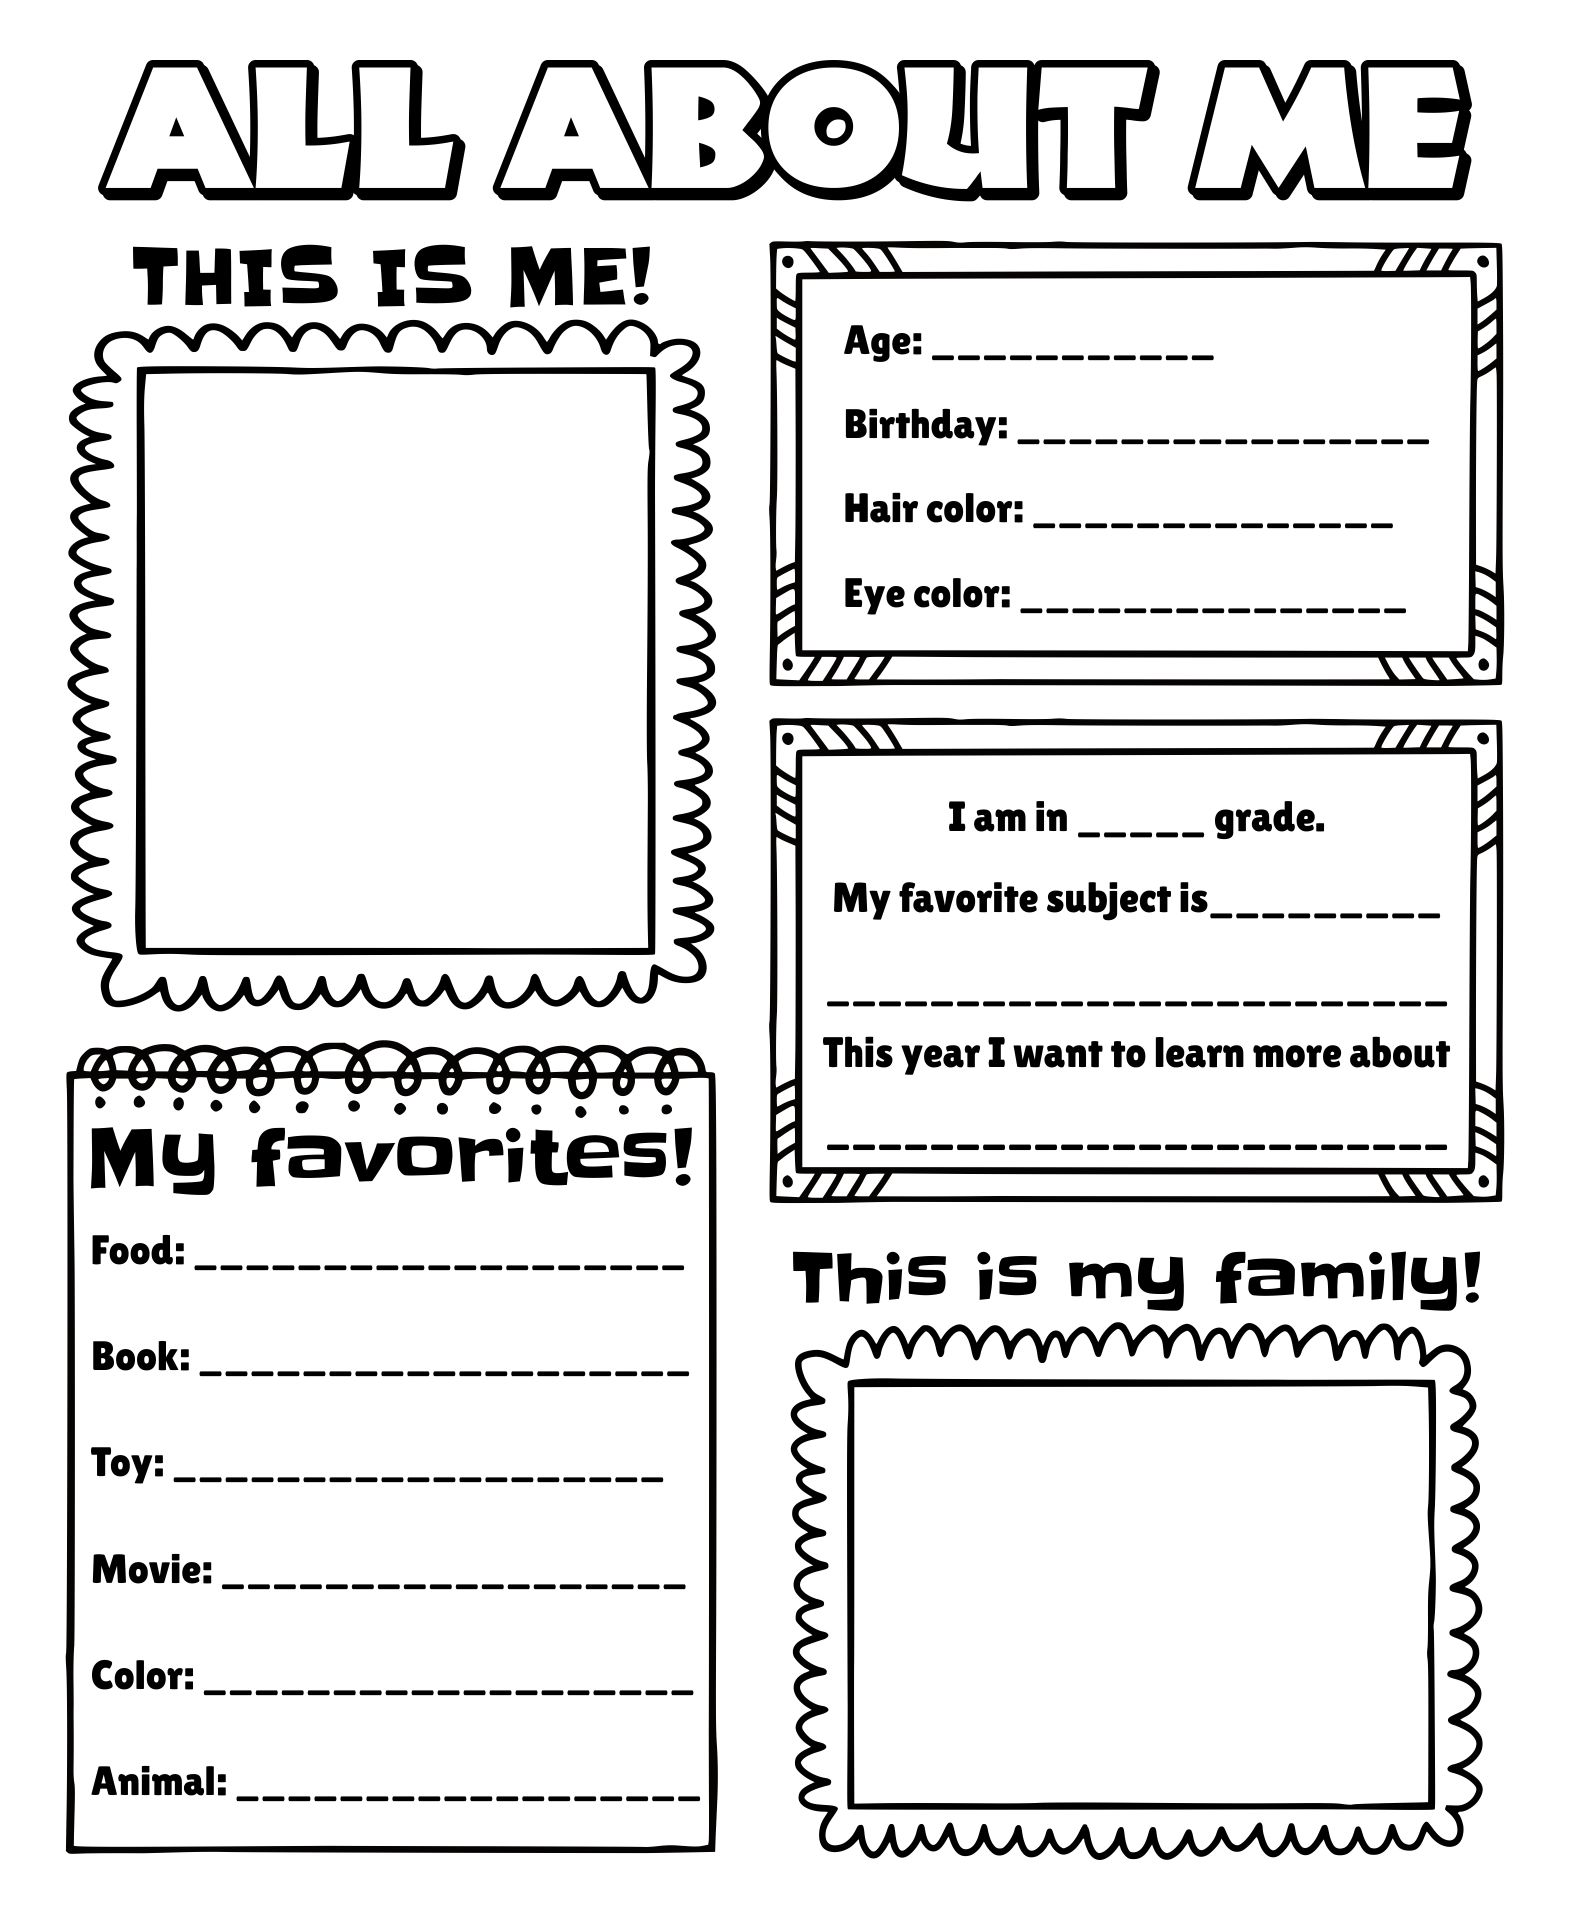 All About Me Activities Preschool Printable